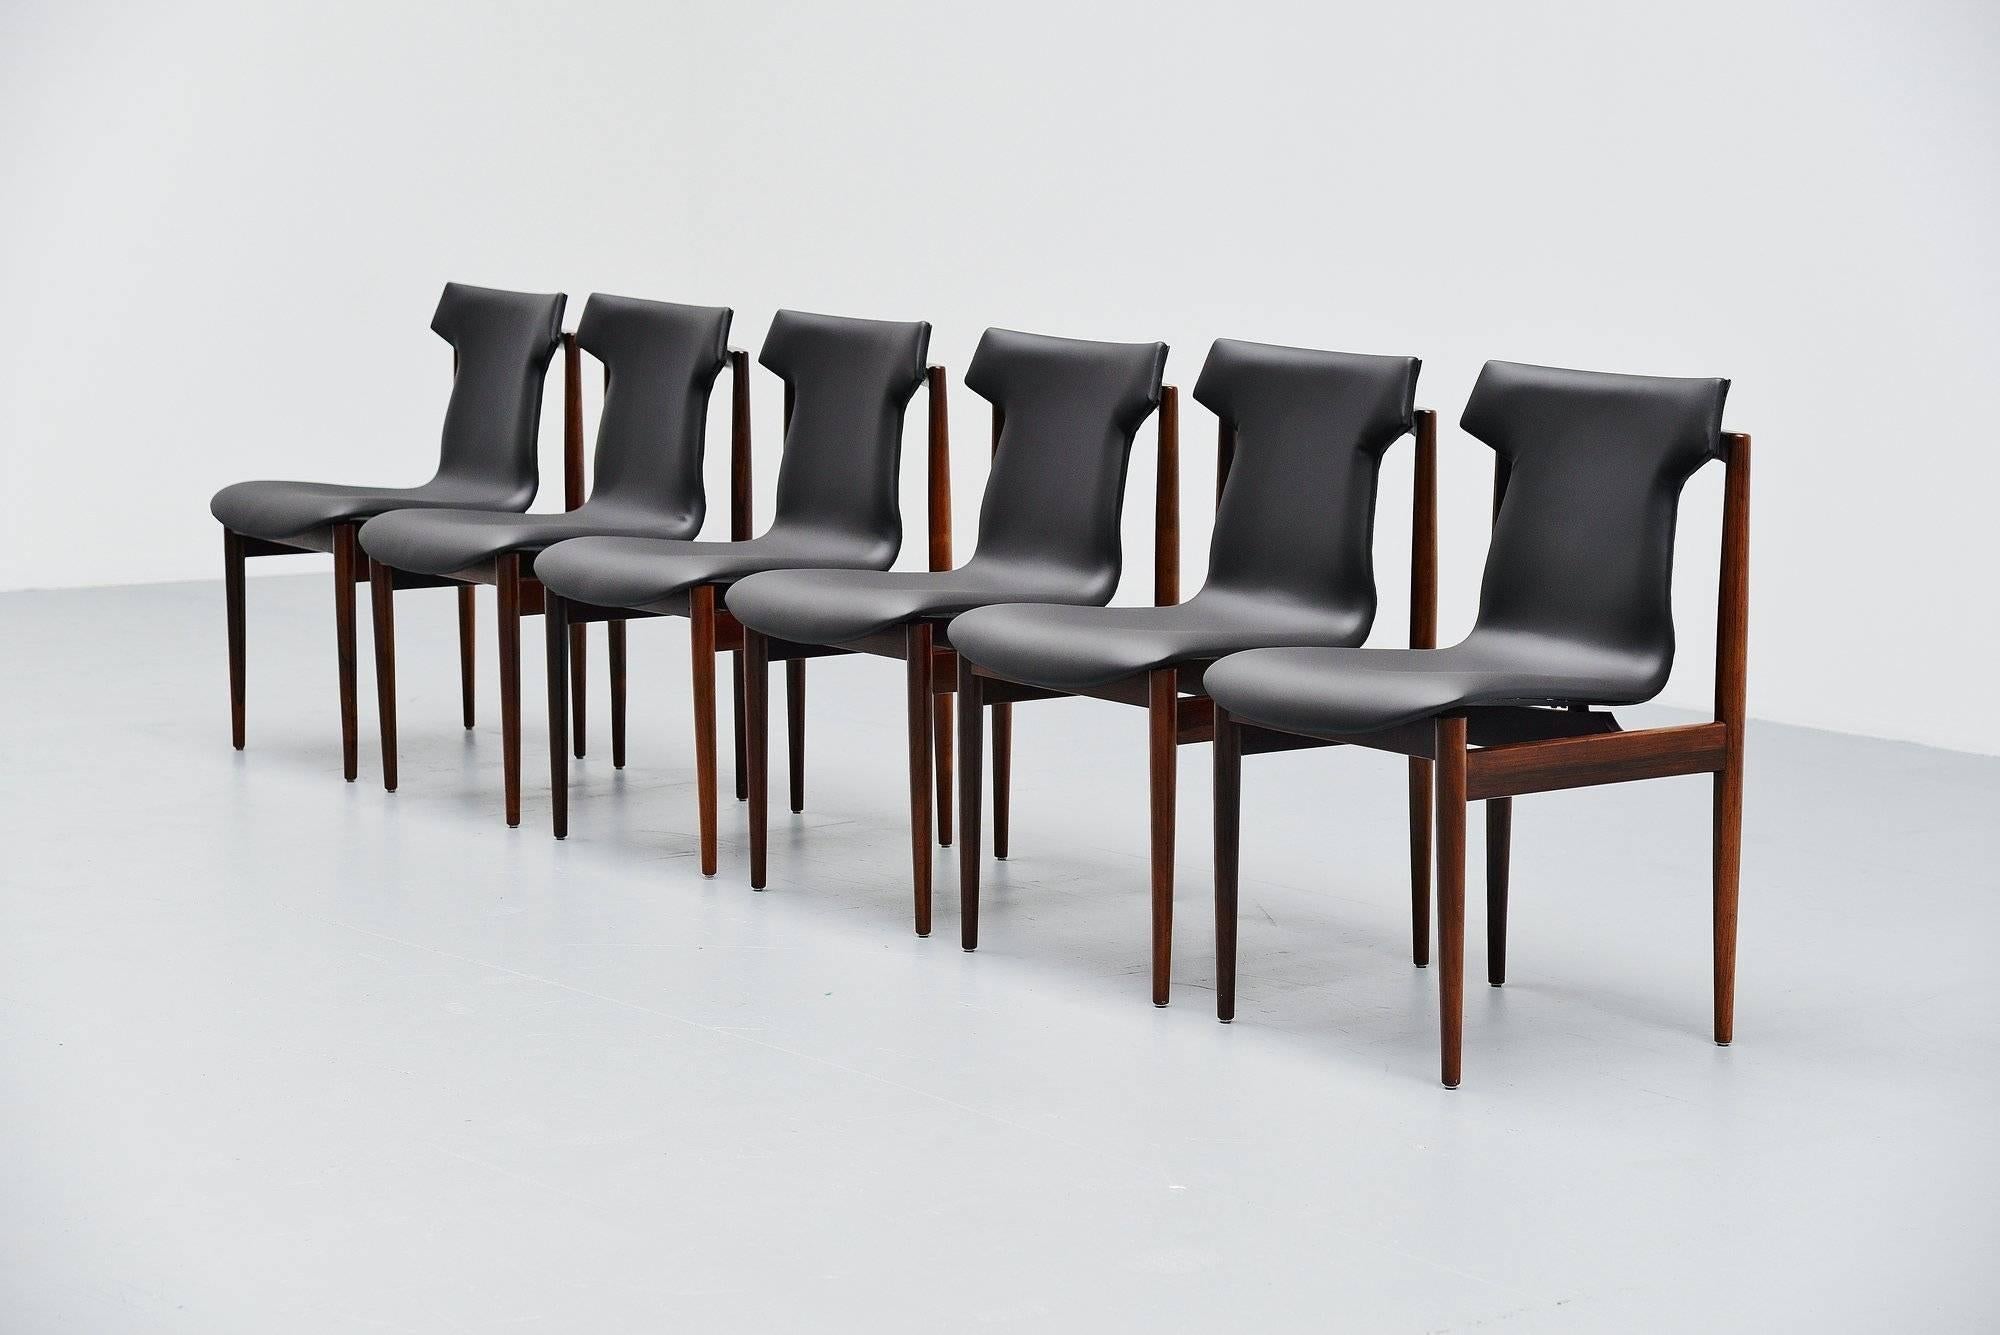 Fantastic set of dining chairs designed by Inger Klingenberg for Fristho Franeker, Holland, 1960. Fristho attracted Inger Klingenberg as designer in 1958. The most famous design from Inger Klingenberg is the IK-chair. The chair was innovative